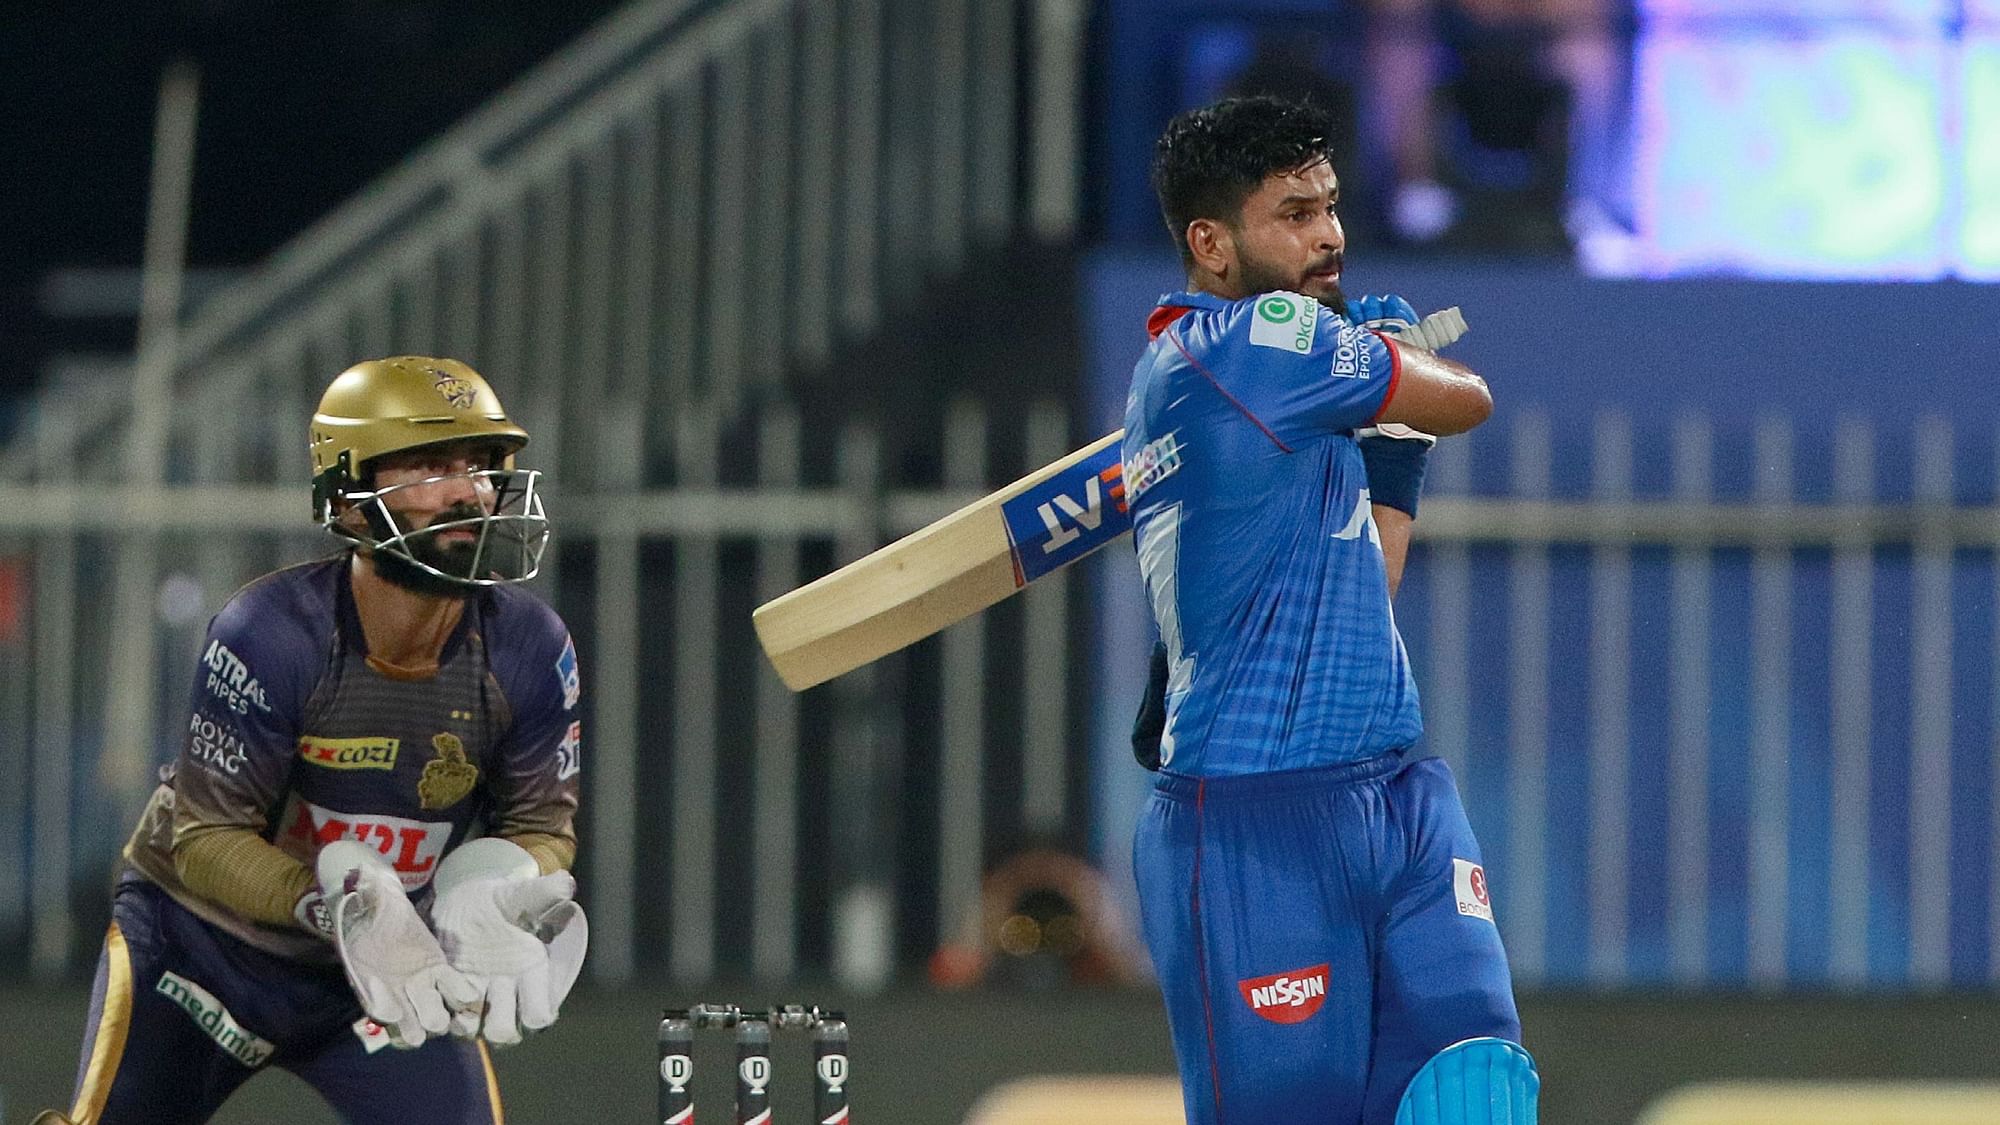 Second-placed Delhi Capitals will lock horns with fourth-placed Kolkata Knight Riders in match 42 of IPL 2020.